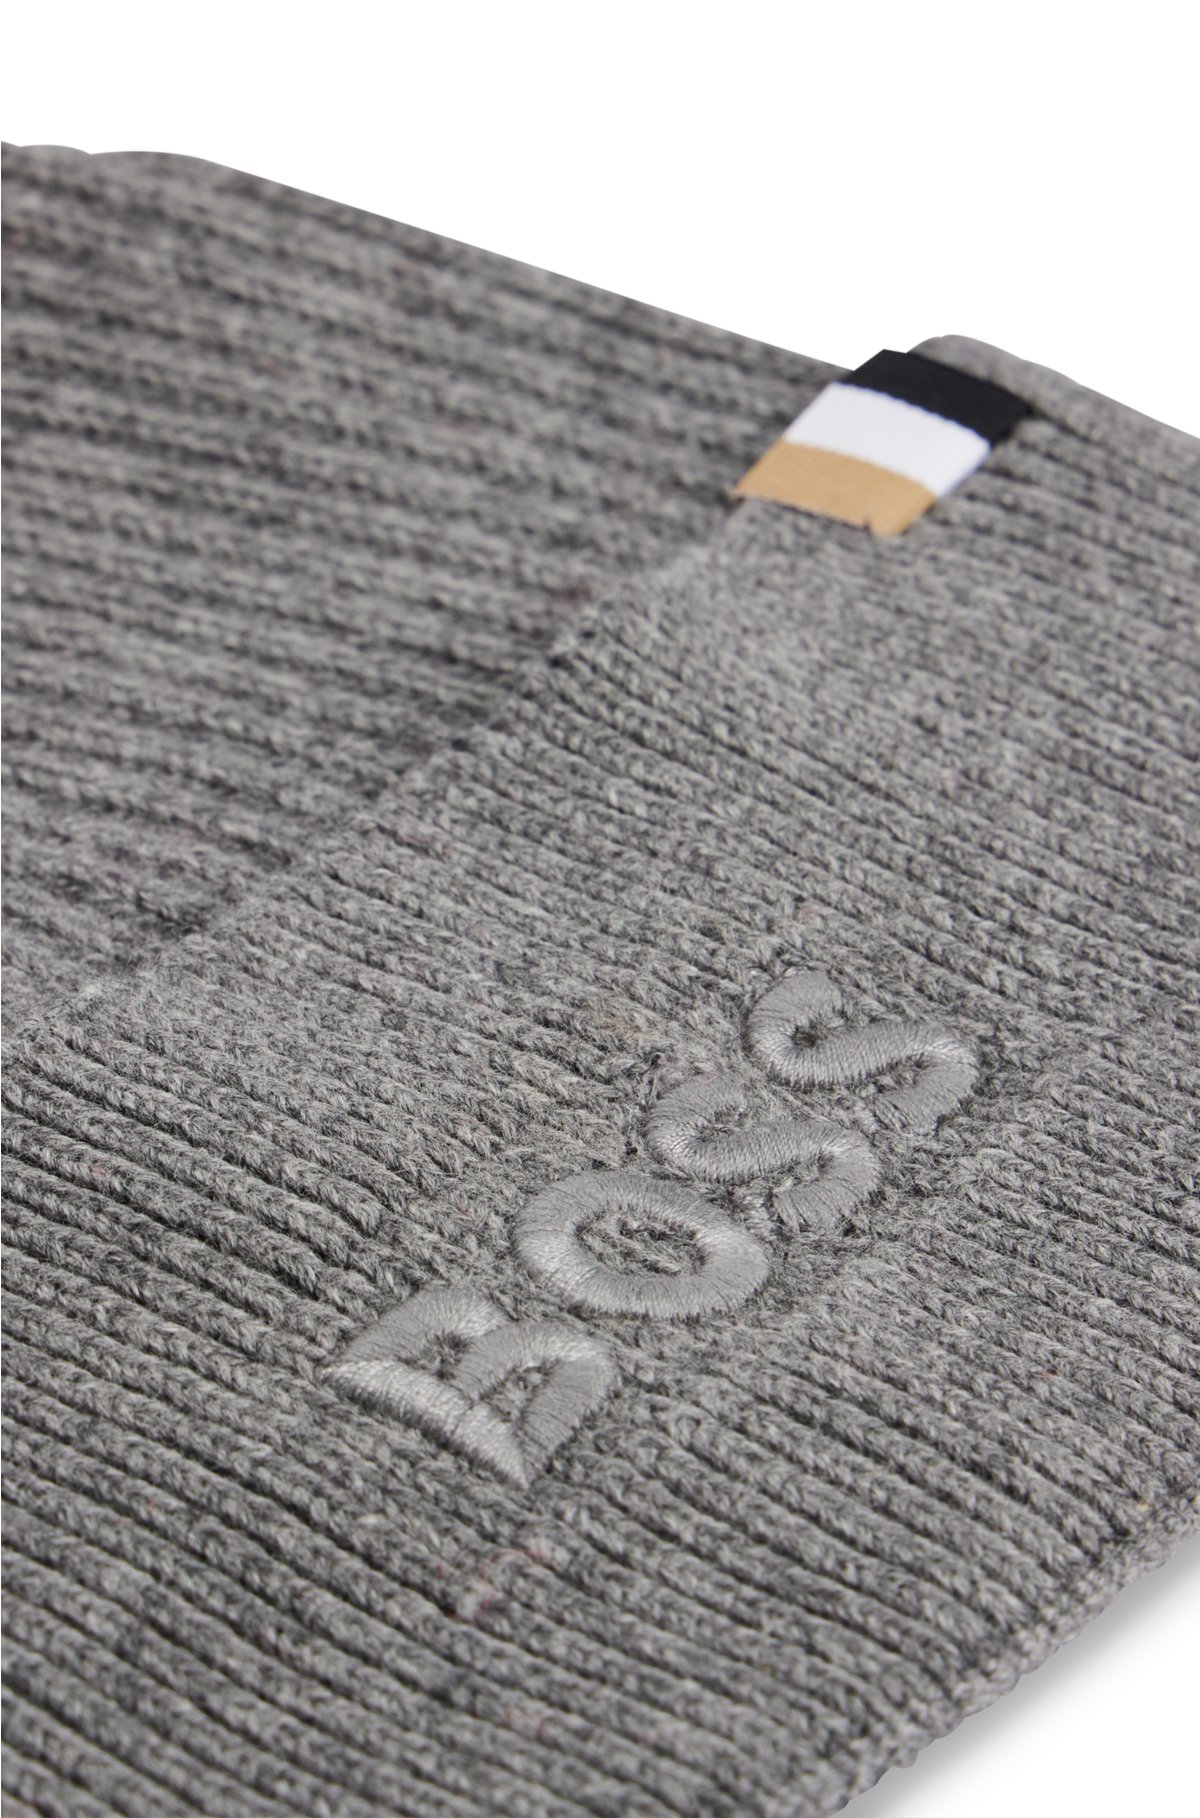 Embroidered-logo beanie hat in cotton and wool, Grey